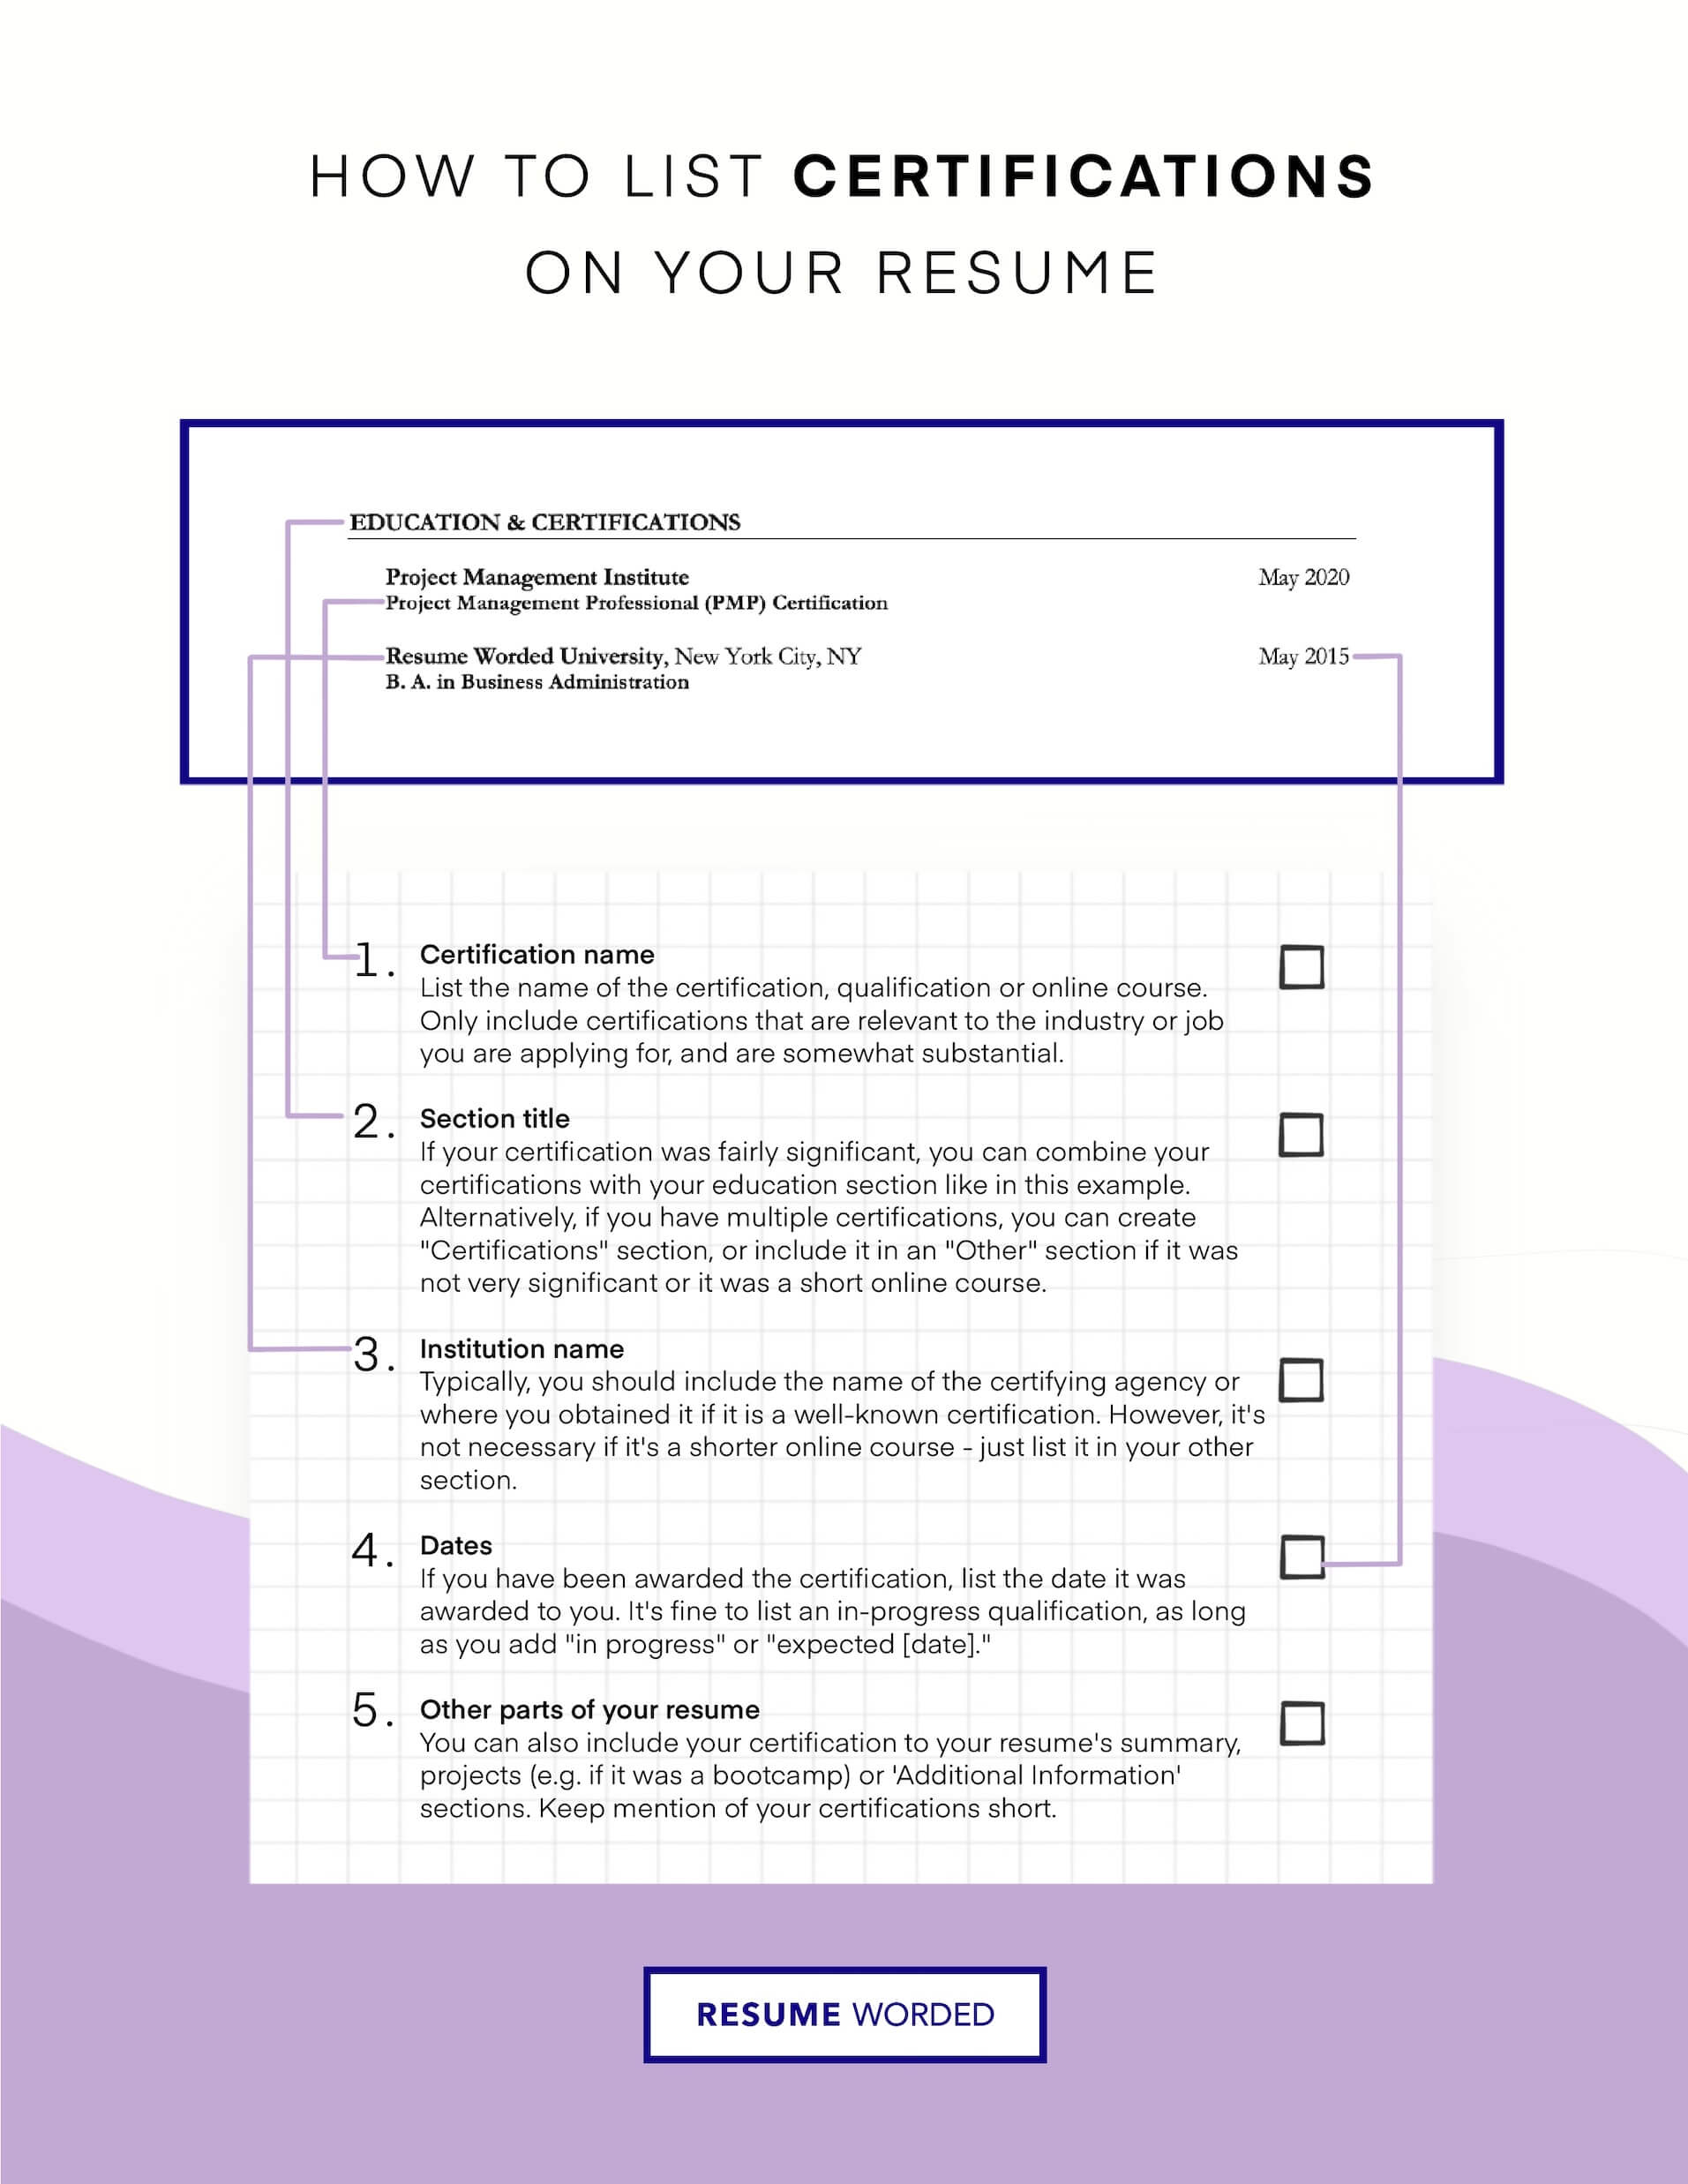 Get certifications in place of experience. - Entry Level Claims Adjuster Resume